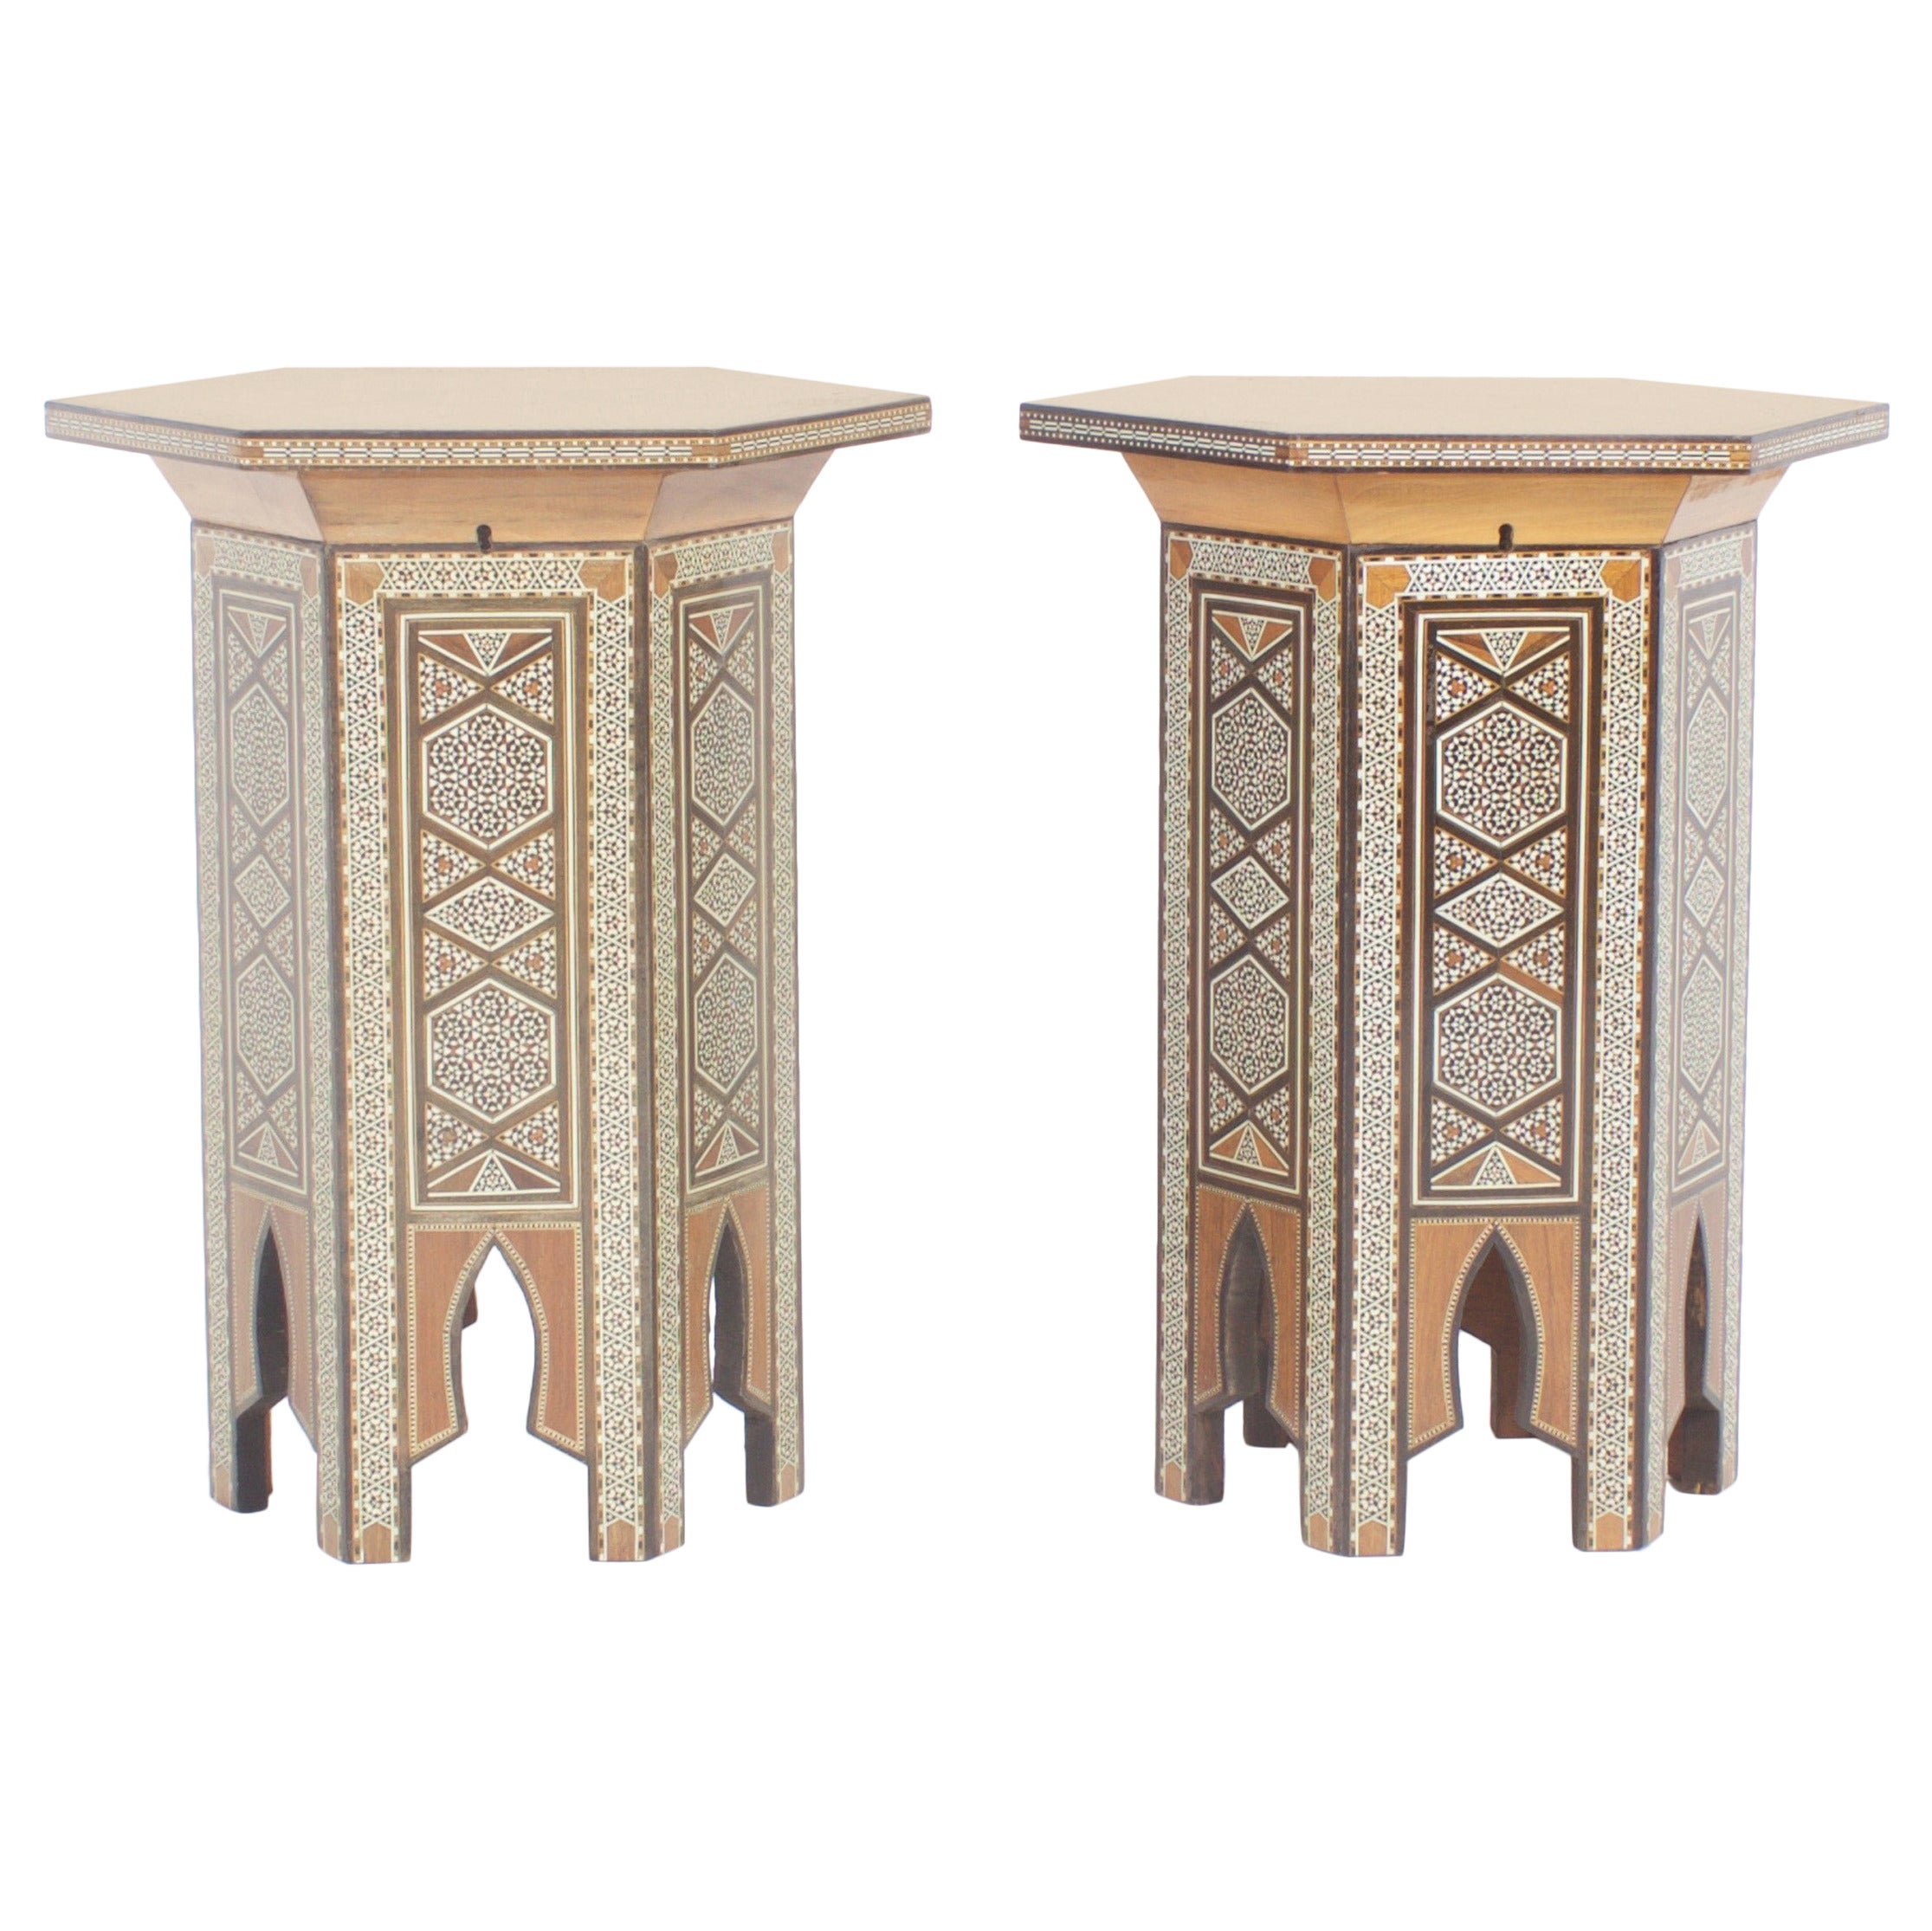 Pair of Syrian Hexagonal End Tables